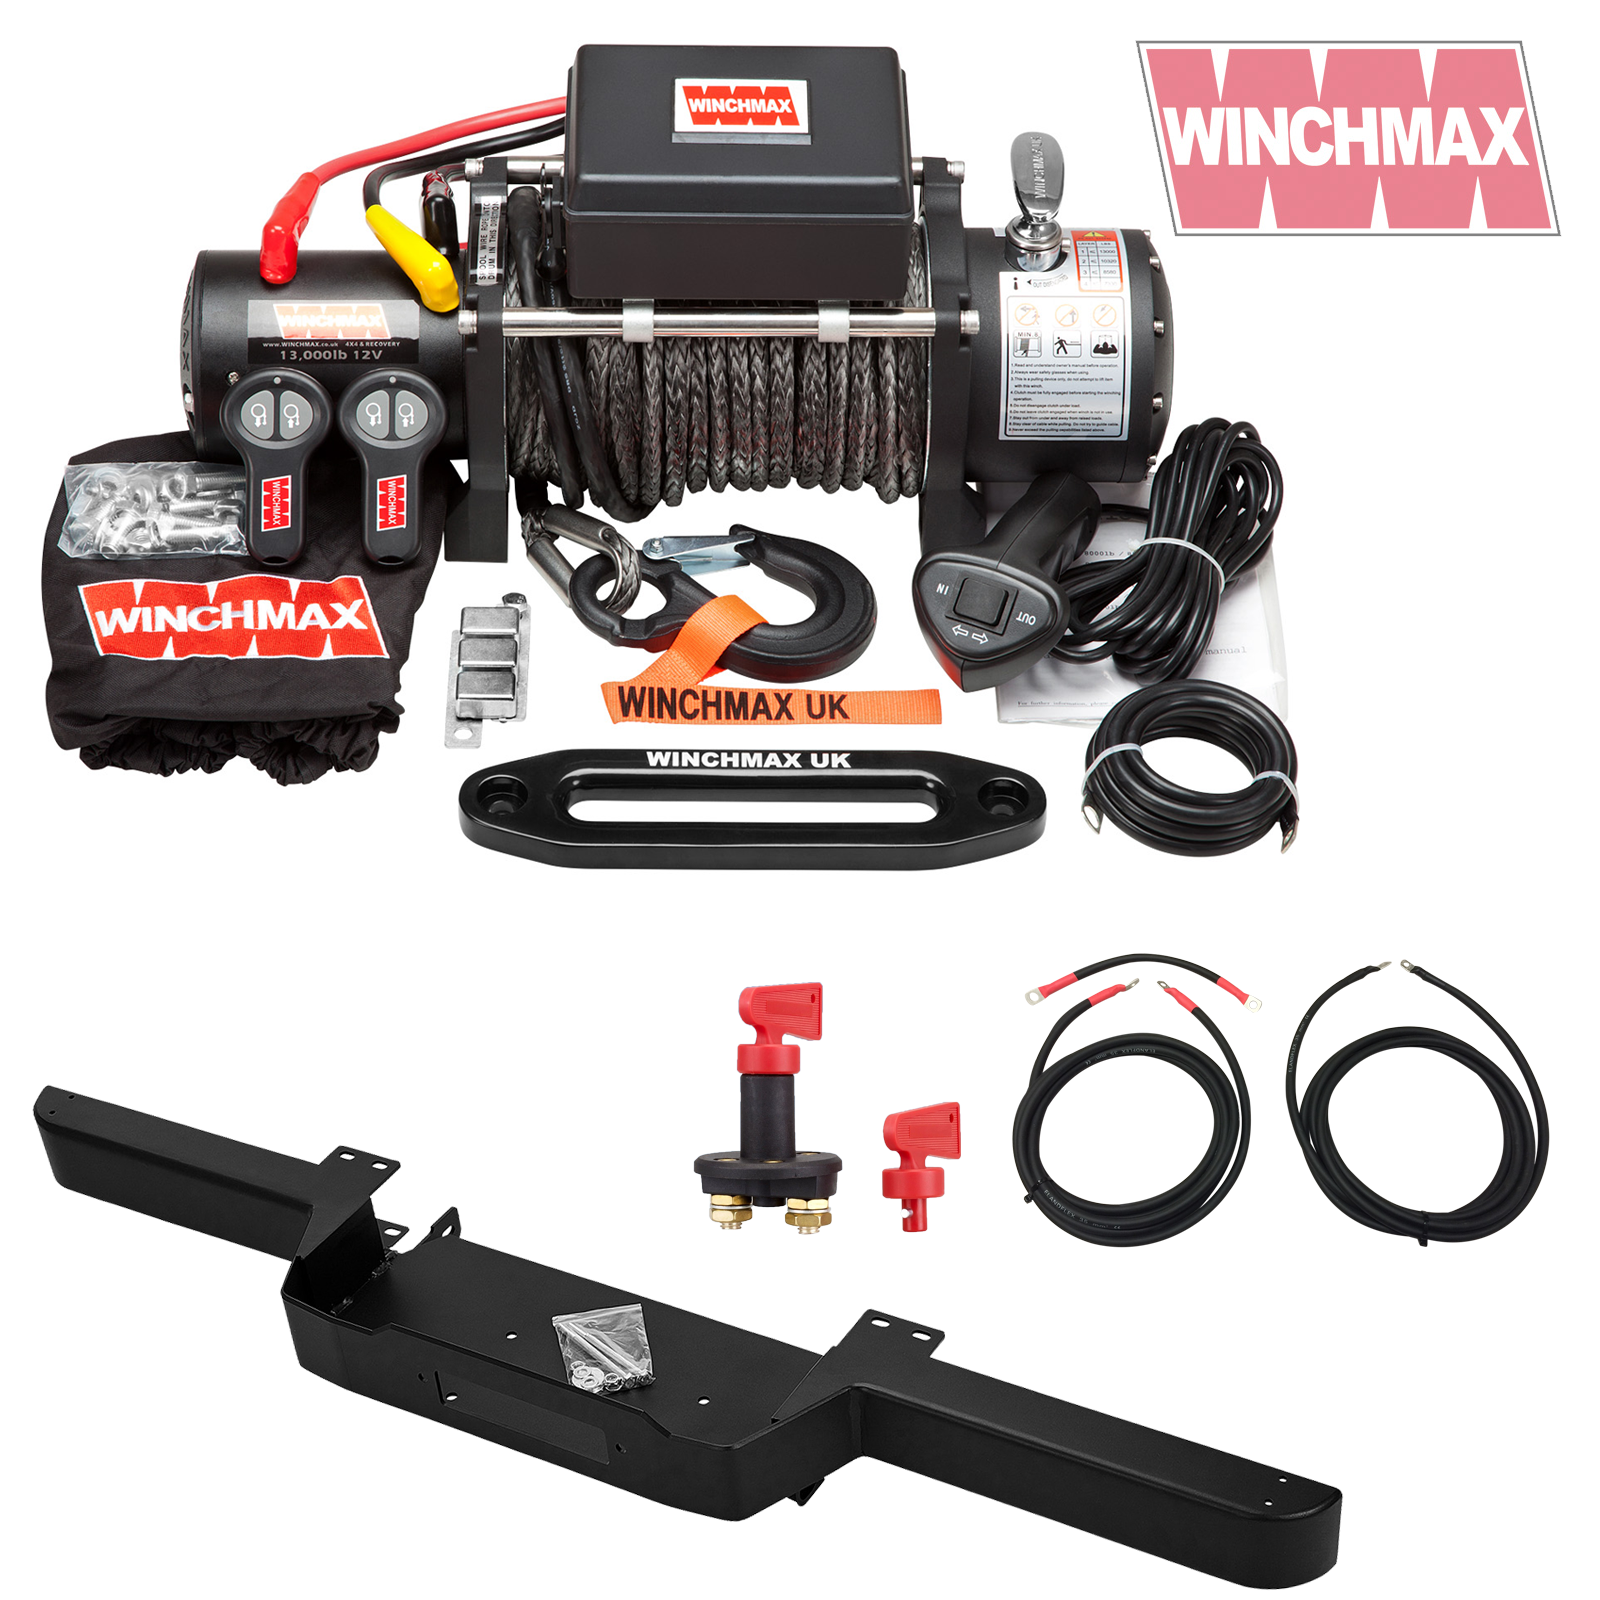 Winchmax 13500lb 12v Military Grade Winch. Dyneema Rope. Defender Bumper Mount. Wiring Kit and Isolator